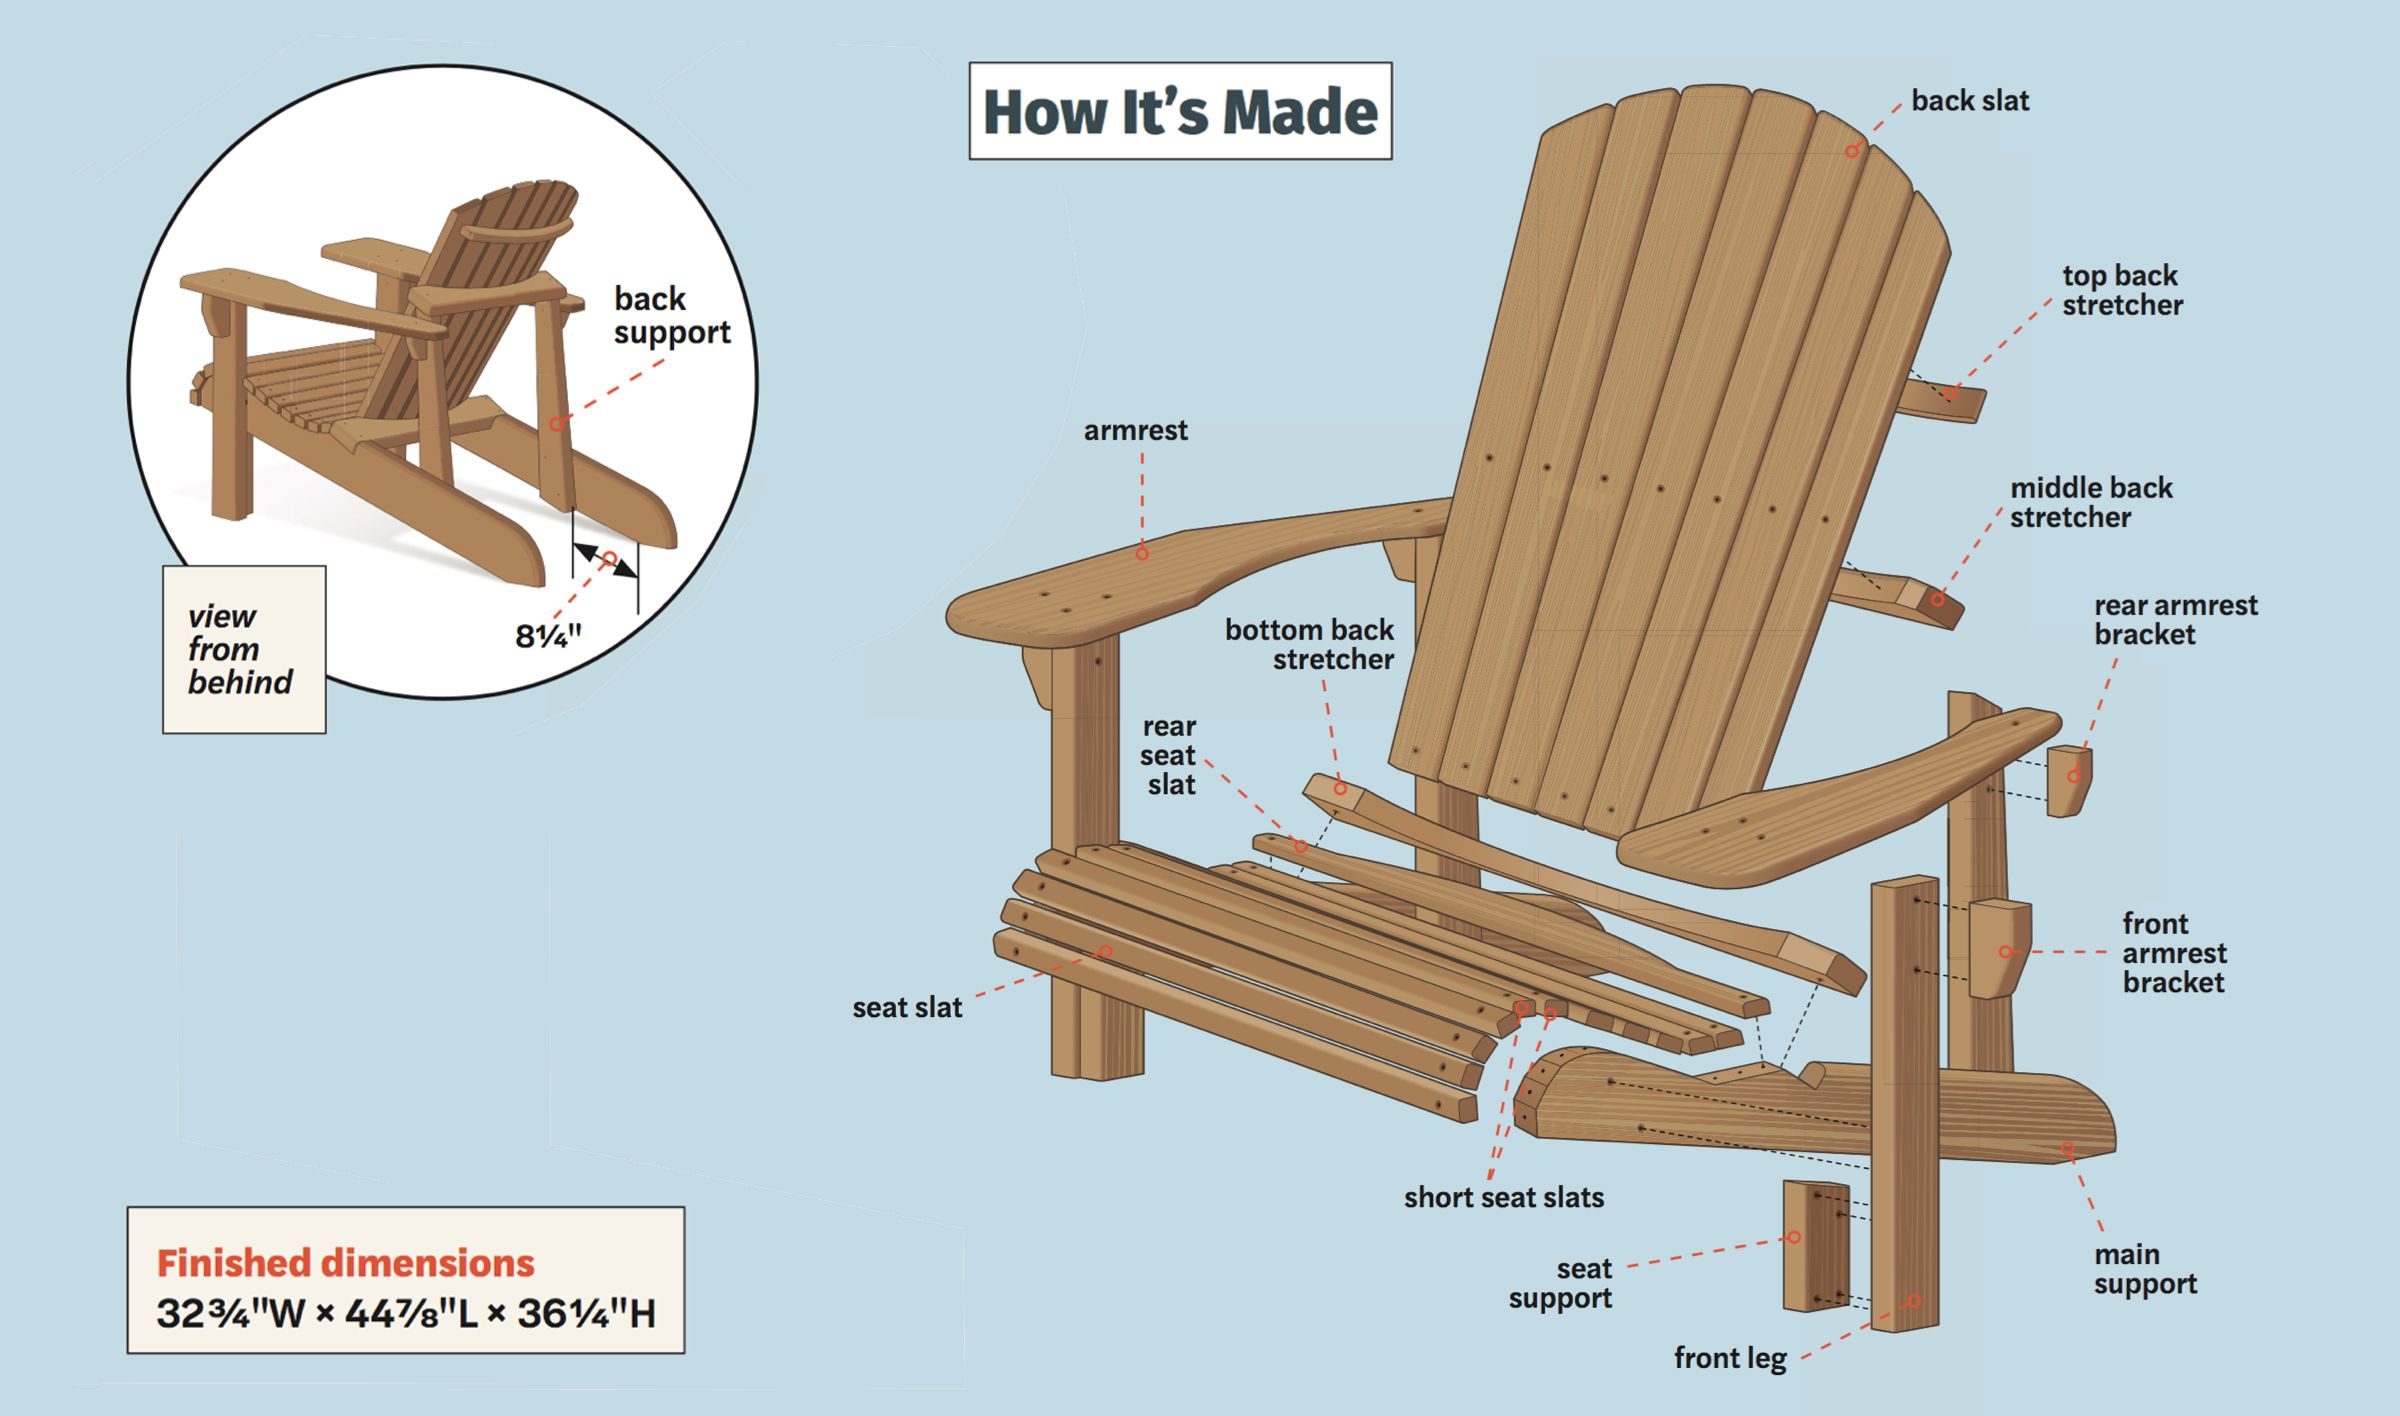 The 10 Best Adirondack Chairs That Balance Comfort And Durability